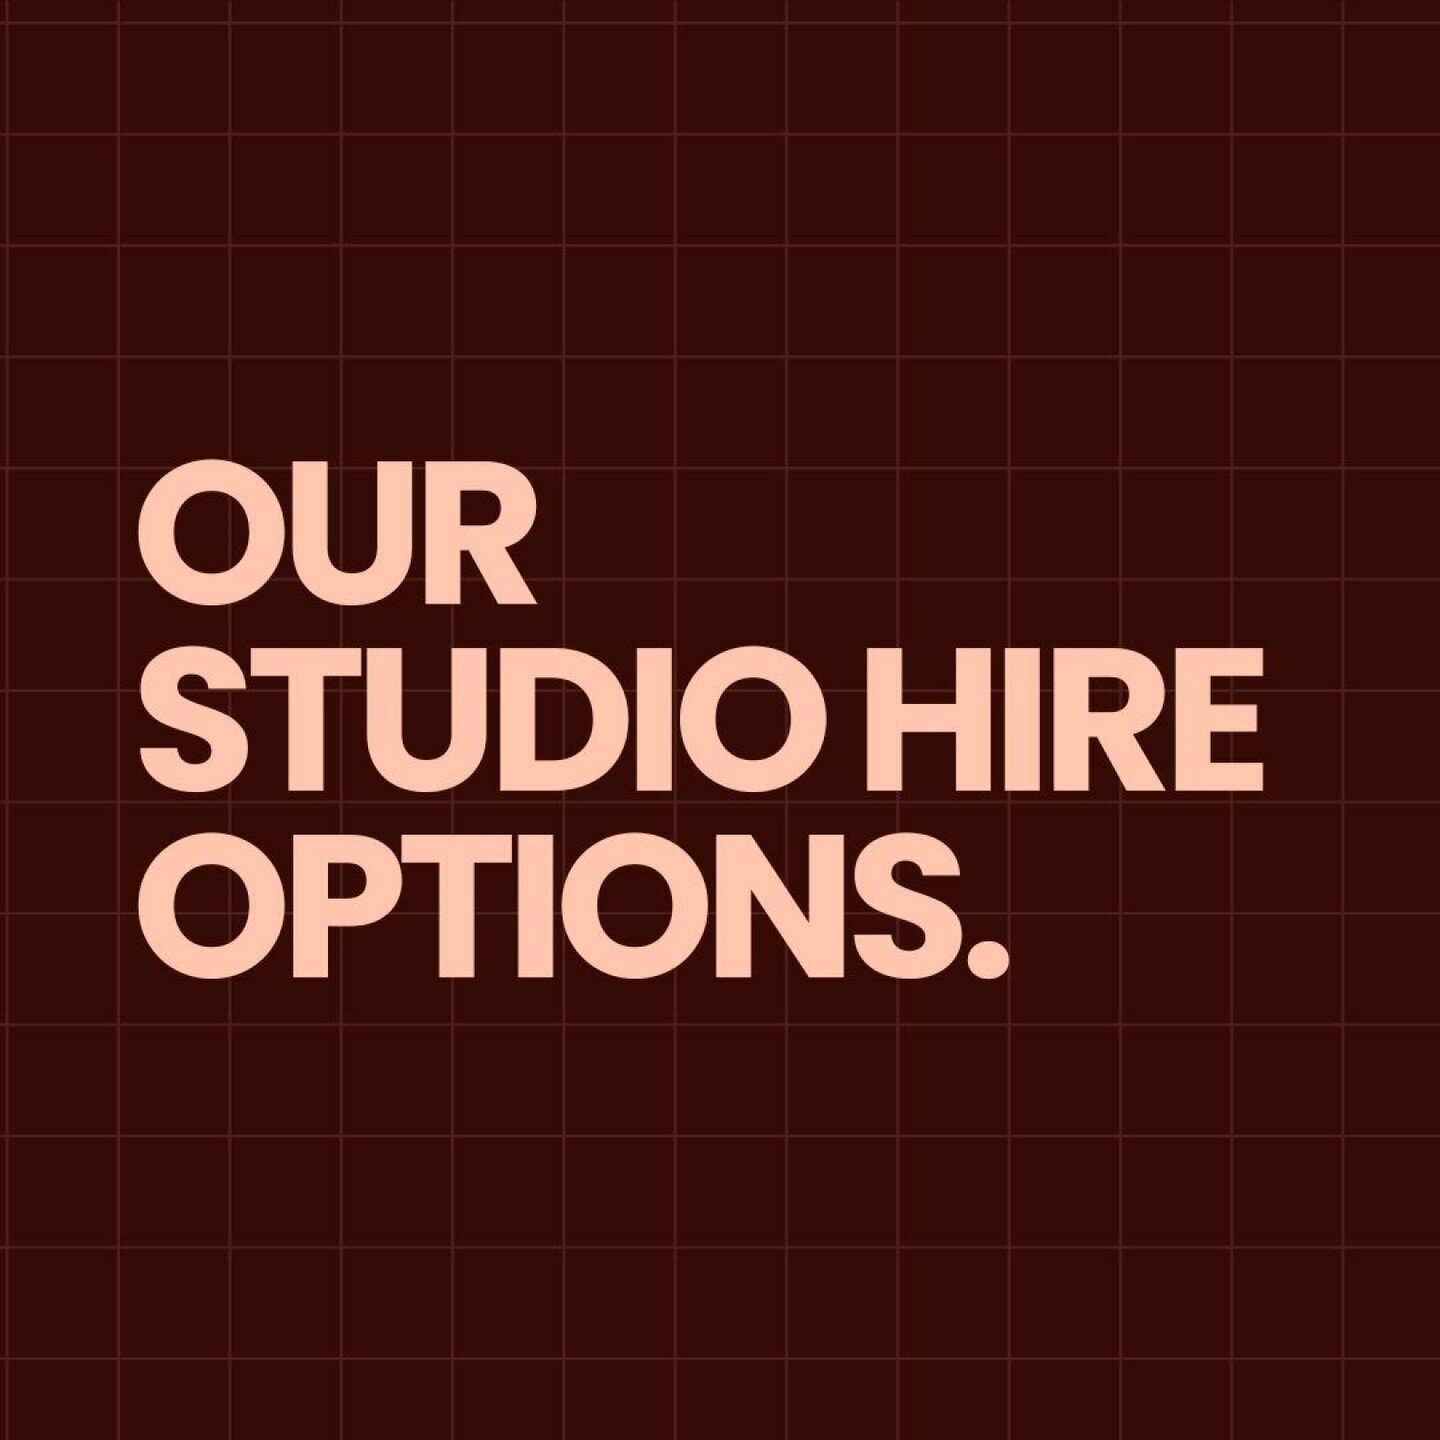 At the studio we have two different hire options depending on what you need to create content. Let's get into the differences:

Full Hire:
✨Access to the entire collection of props
✨A variety of constant lighting/ring lights
✨Paper/PVC backdrops
✨Stu